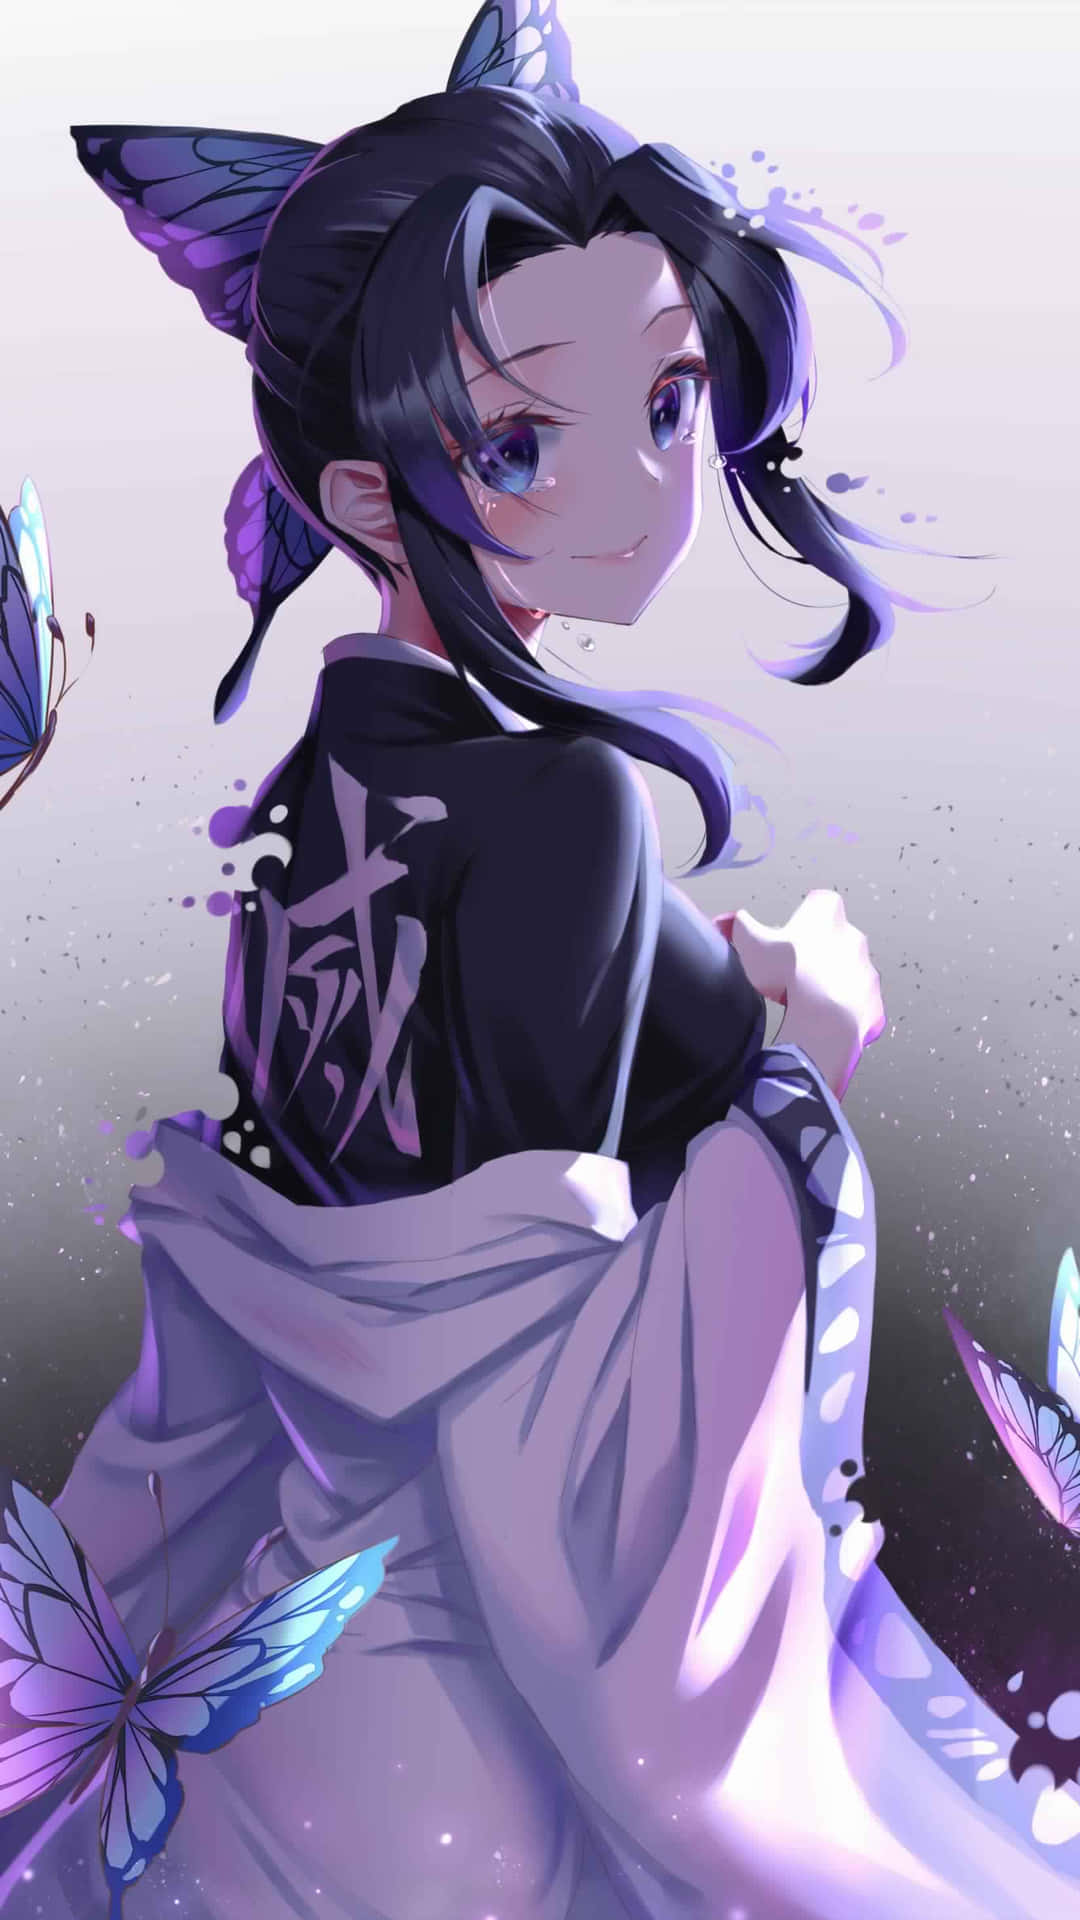 Rejuvenate Your Iphone With This Unique Cool Anime Iphone Wallpaper Background